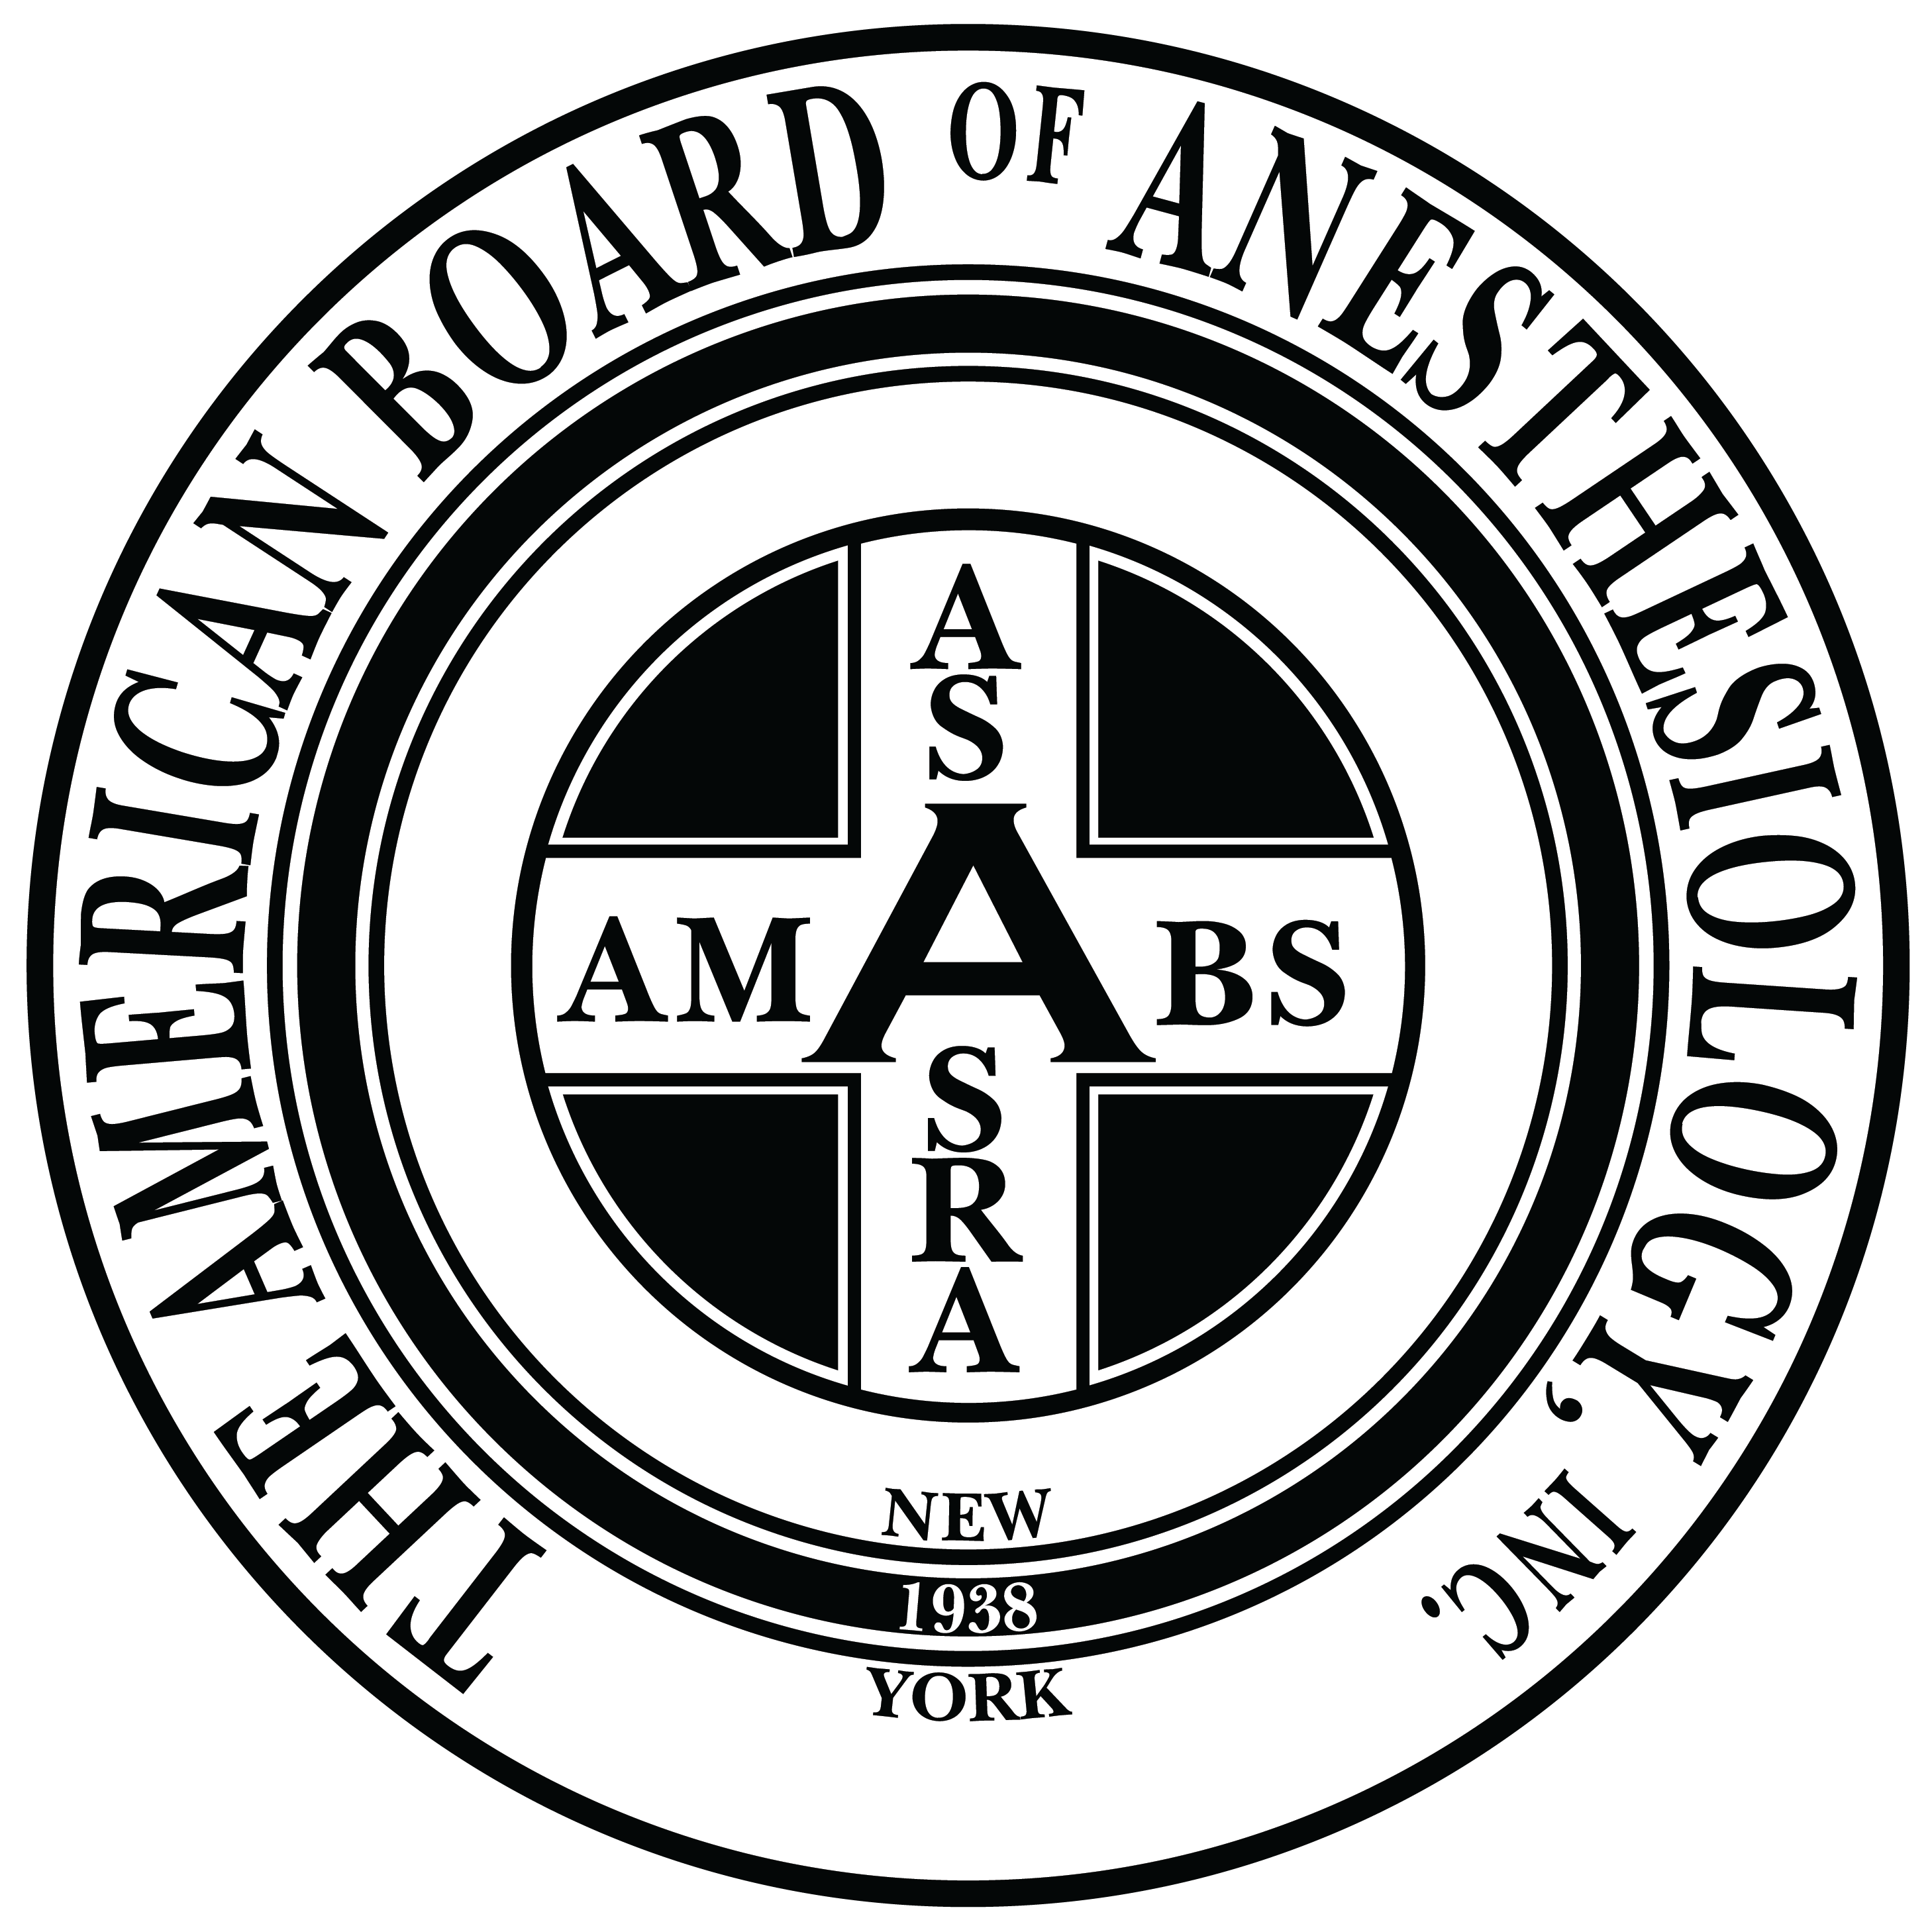 Anesthesiologist Logo - The American Board of Anesthesiology - History